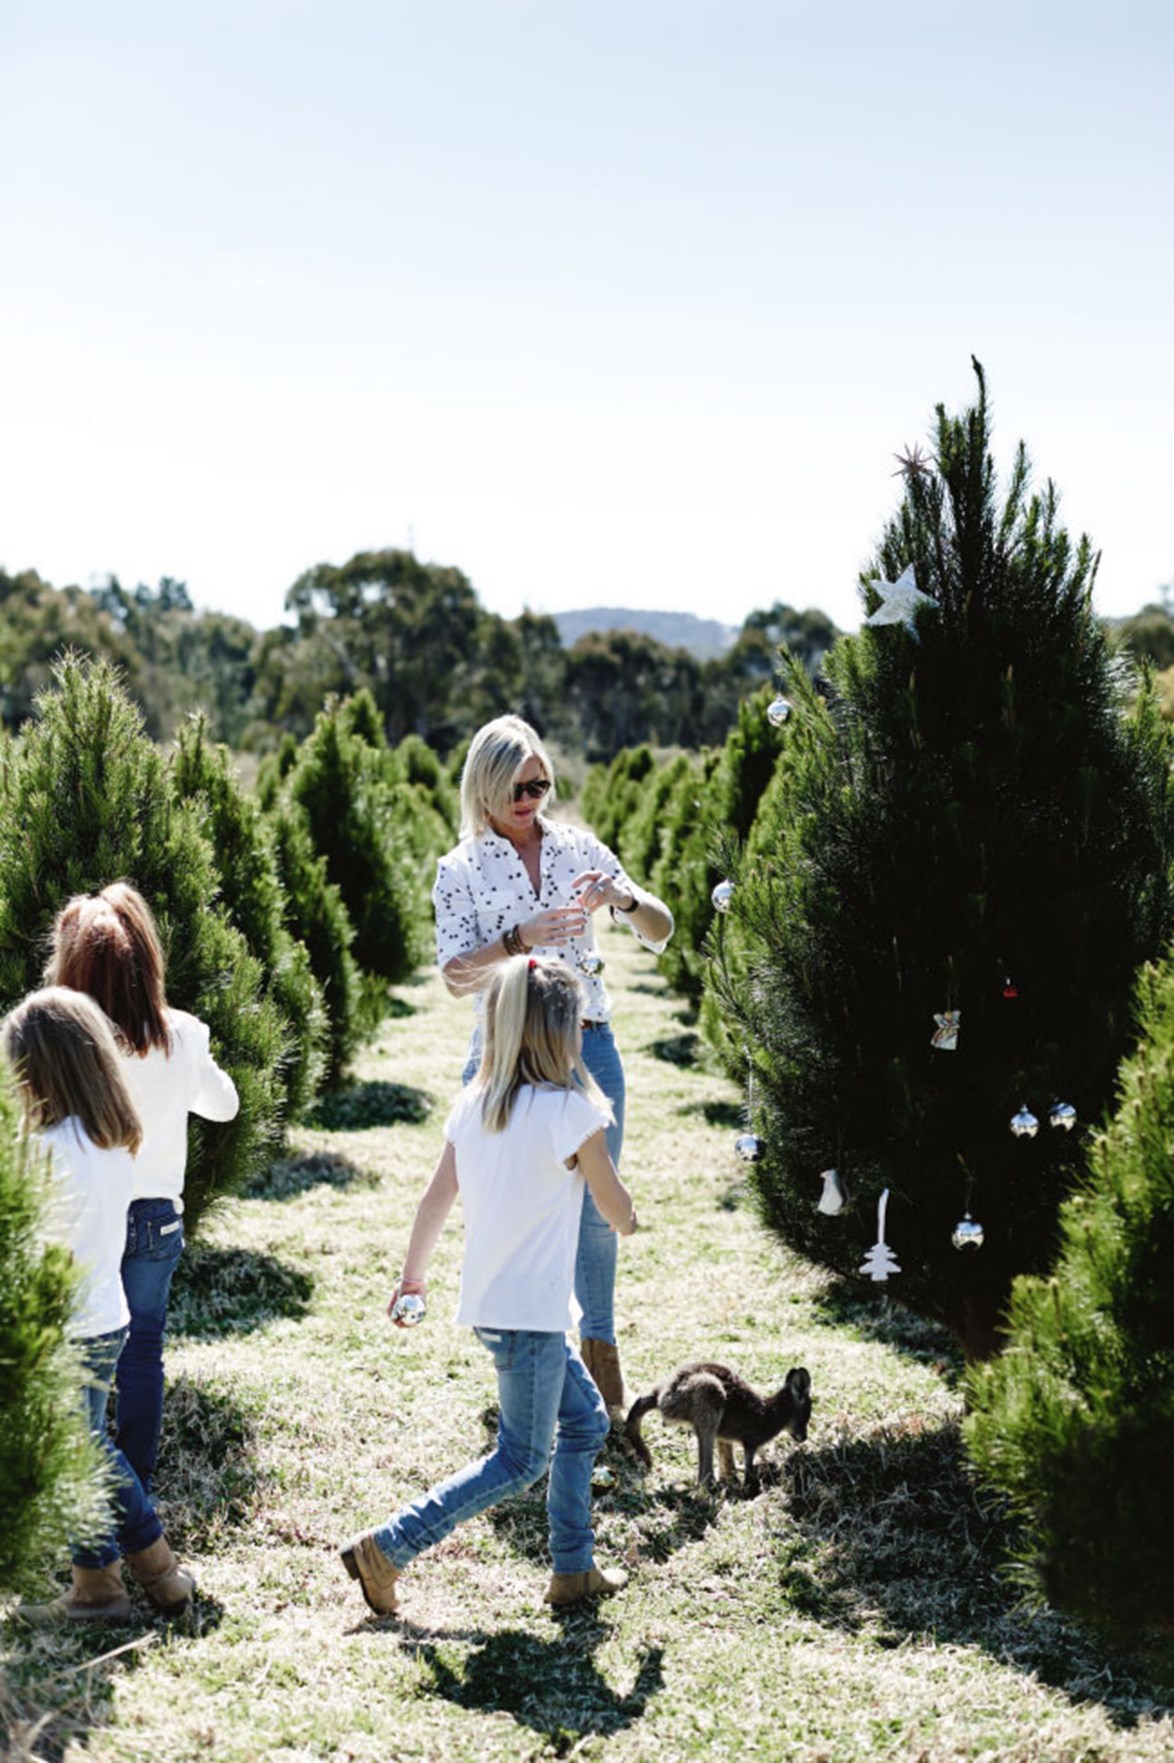 October to December is peak season for Christmas Tree Man, when up to 15,000 trees are cut and delivered to a mix of wholesale and retail customers.